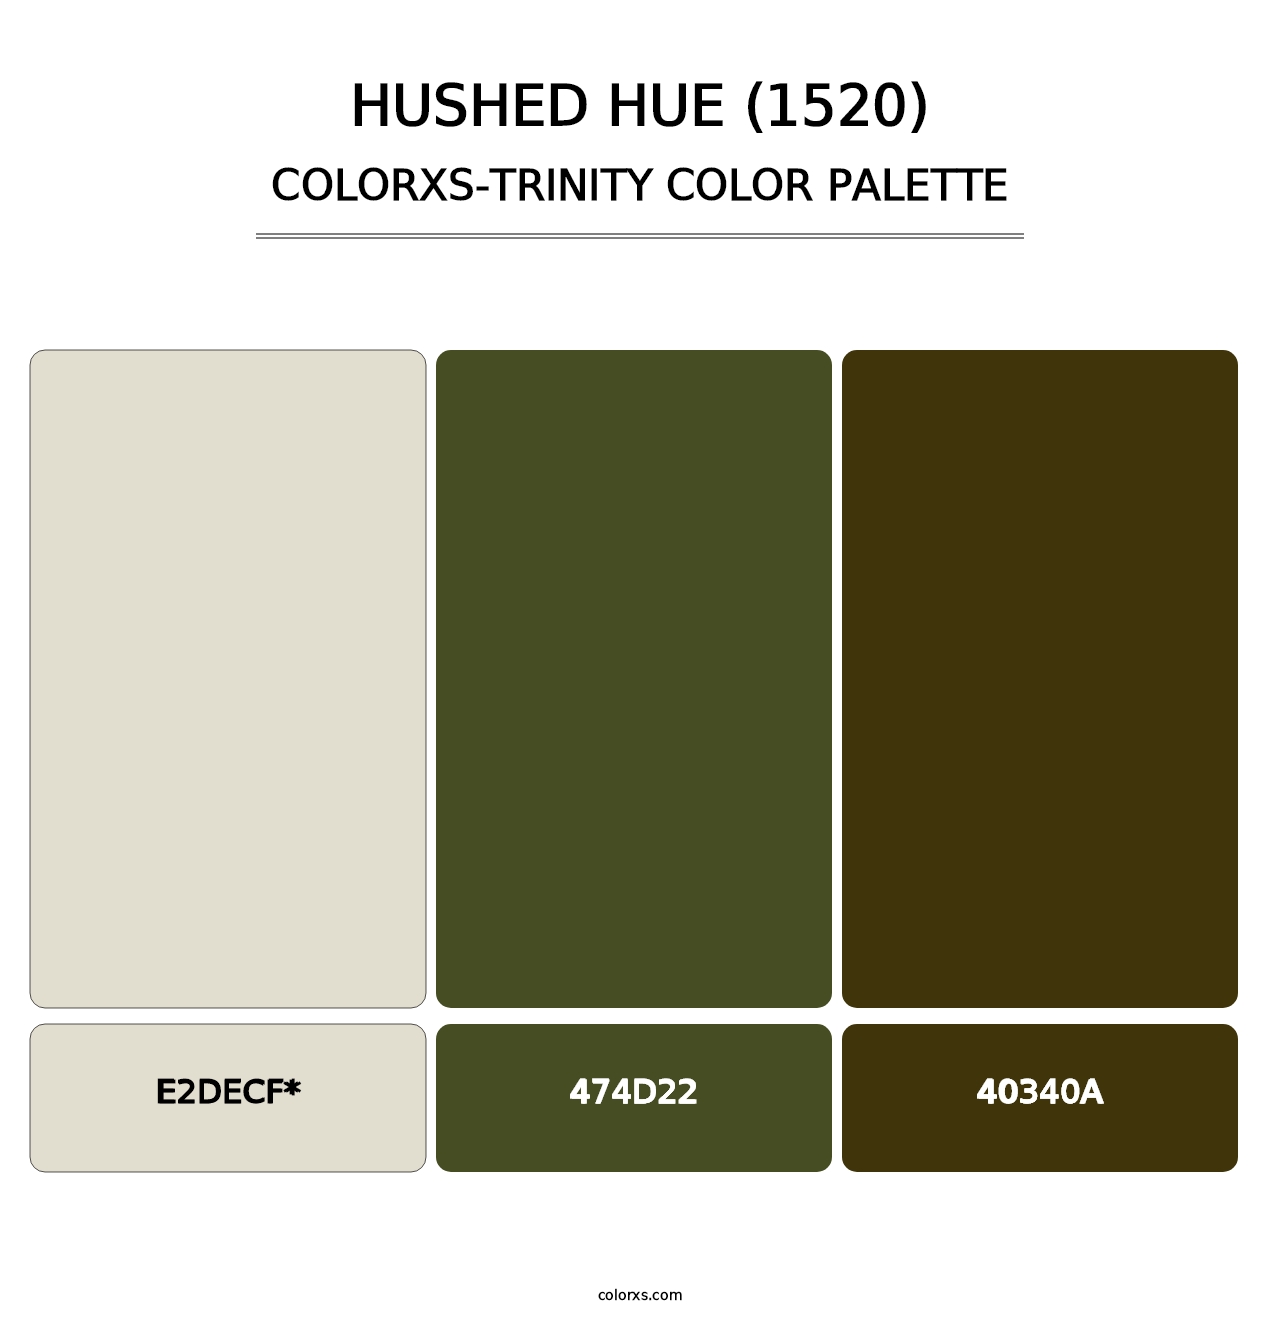 Hushed Hue (1520) - Colorxs Trinity Palette